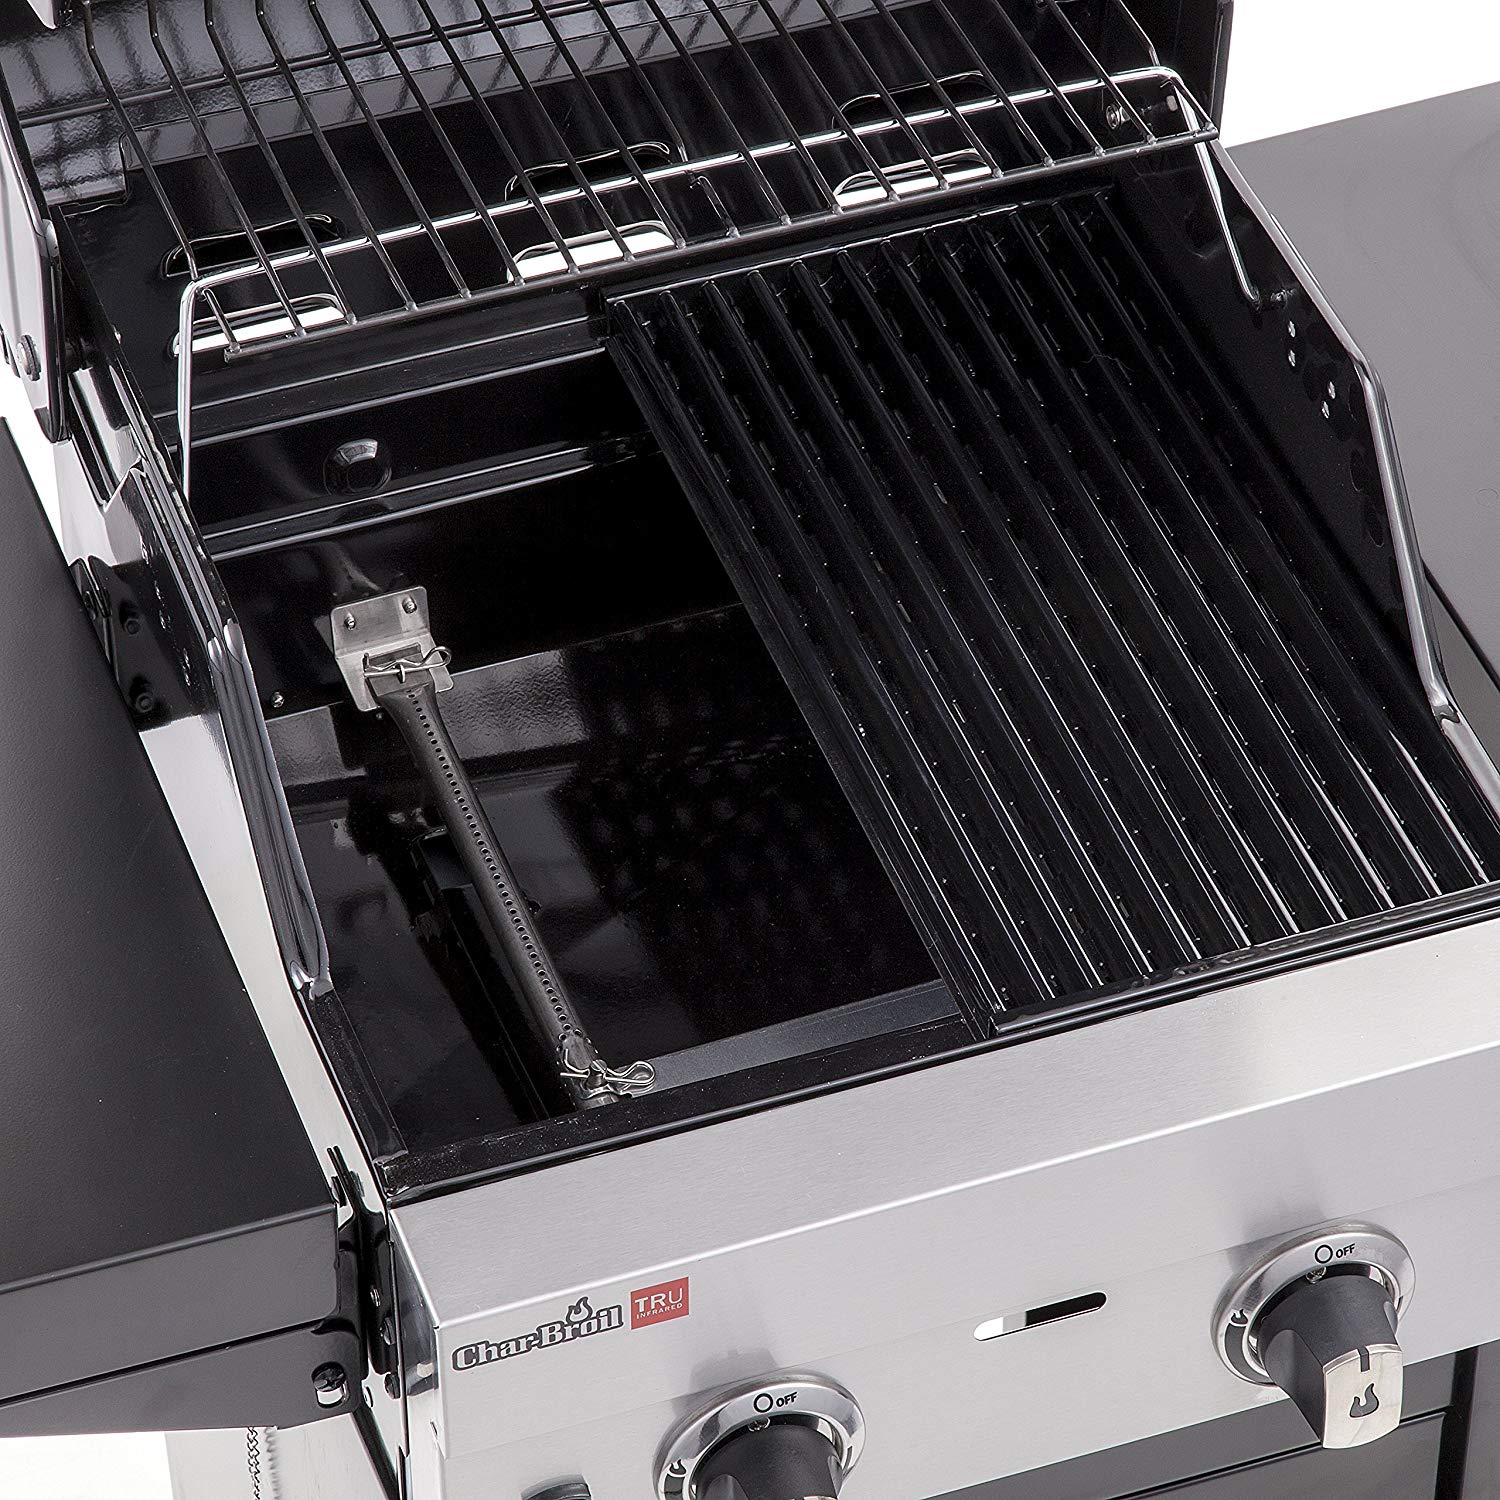 BBQ Pro - Buy Electric, Charcoal and Propane Grills At Best Prices